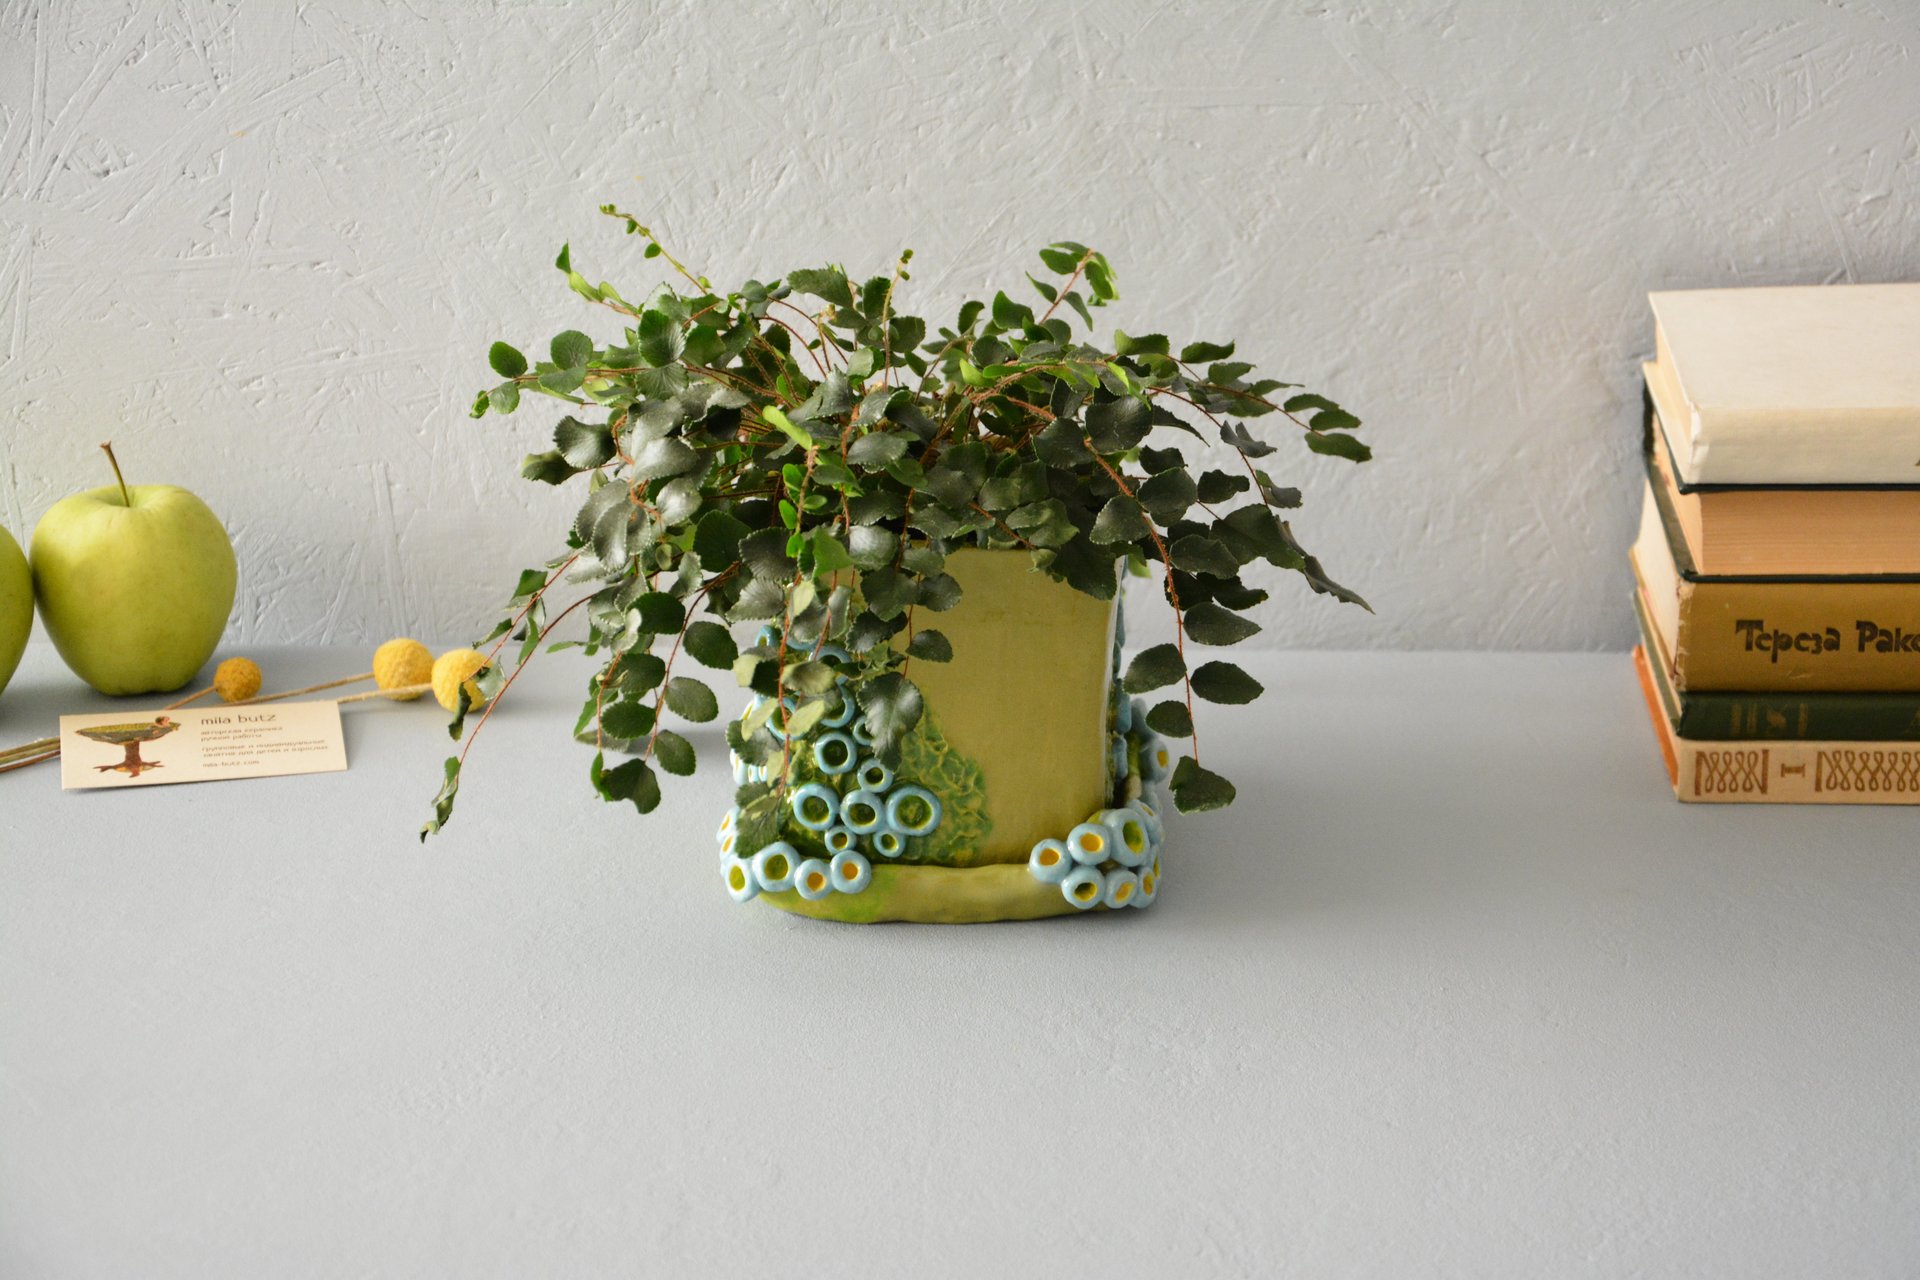 Flowers pot Green cube - Ceramic others utility, height - 12.5 cm, length-width 13 cm * 14 cm, photo 2 of 4.